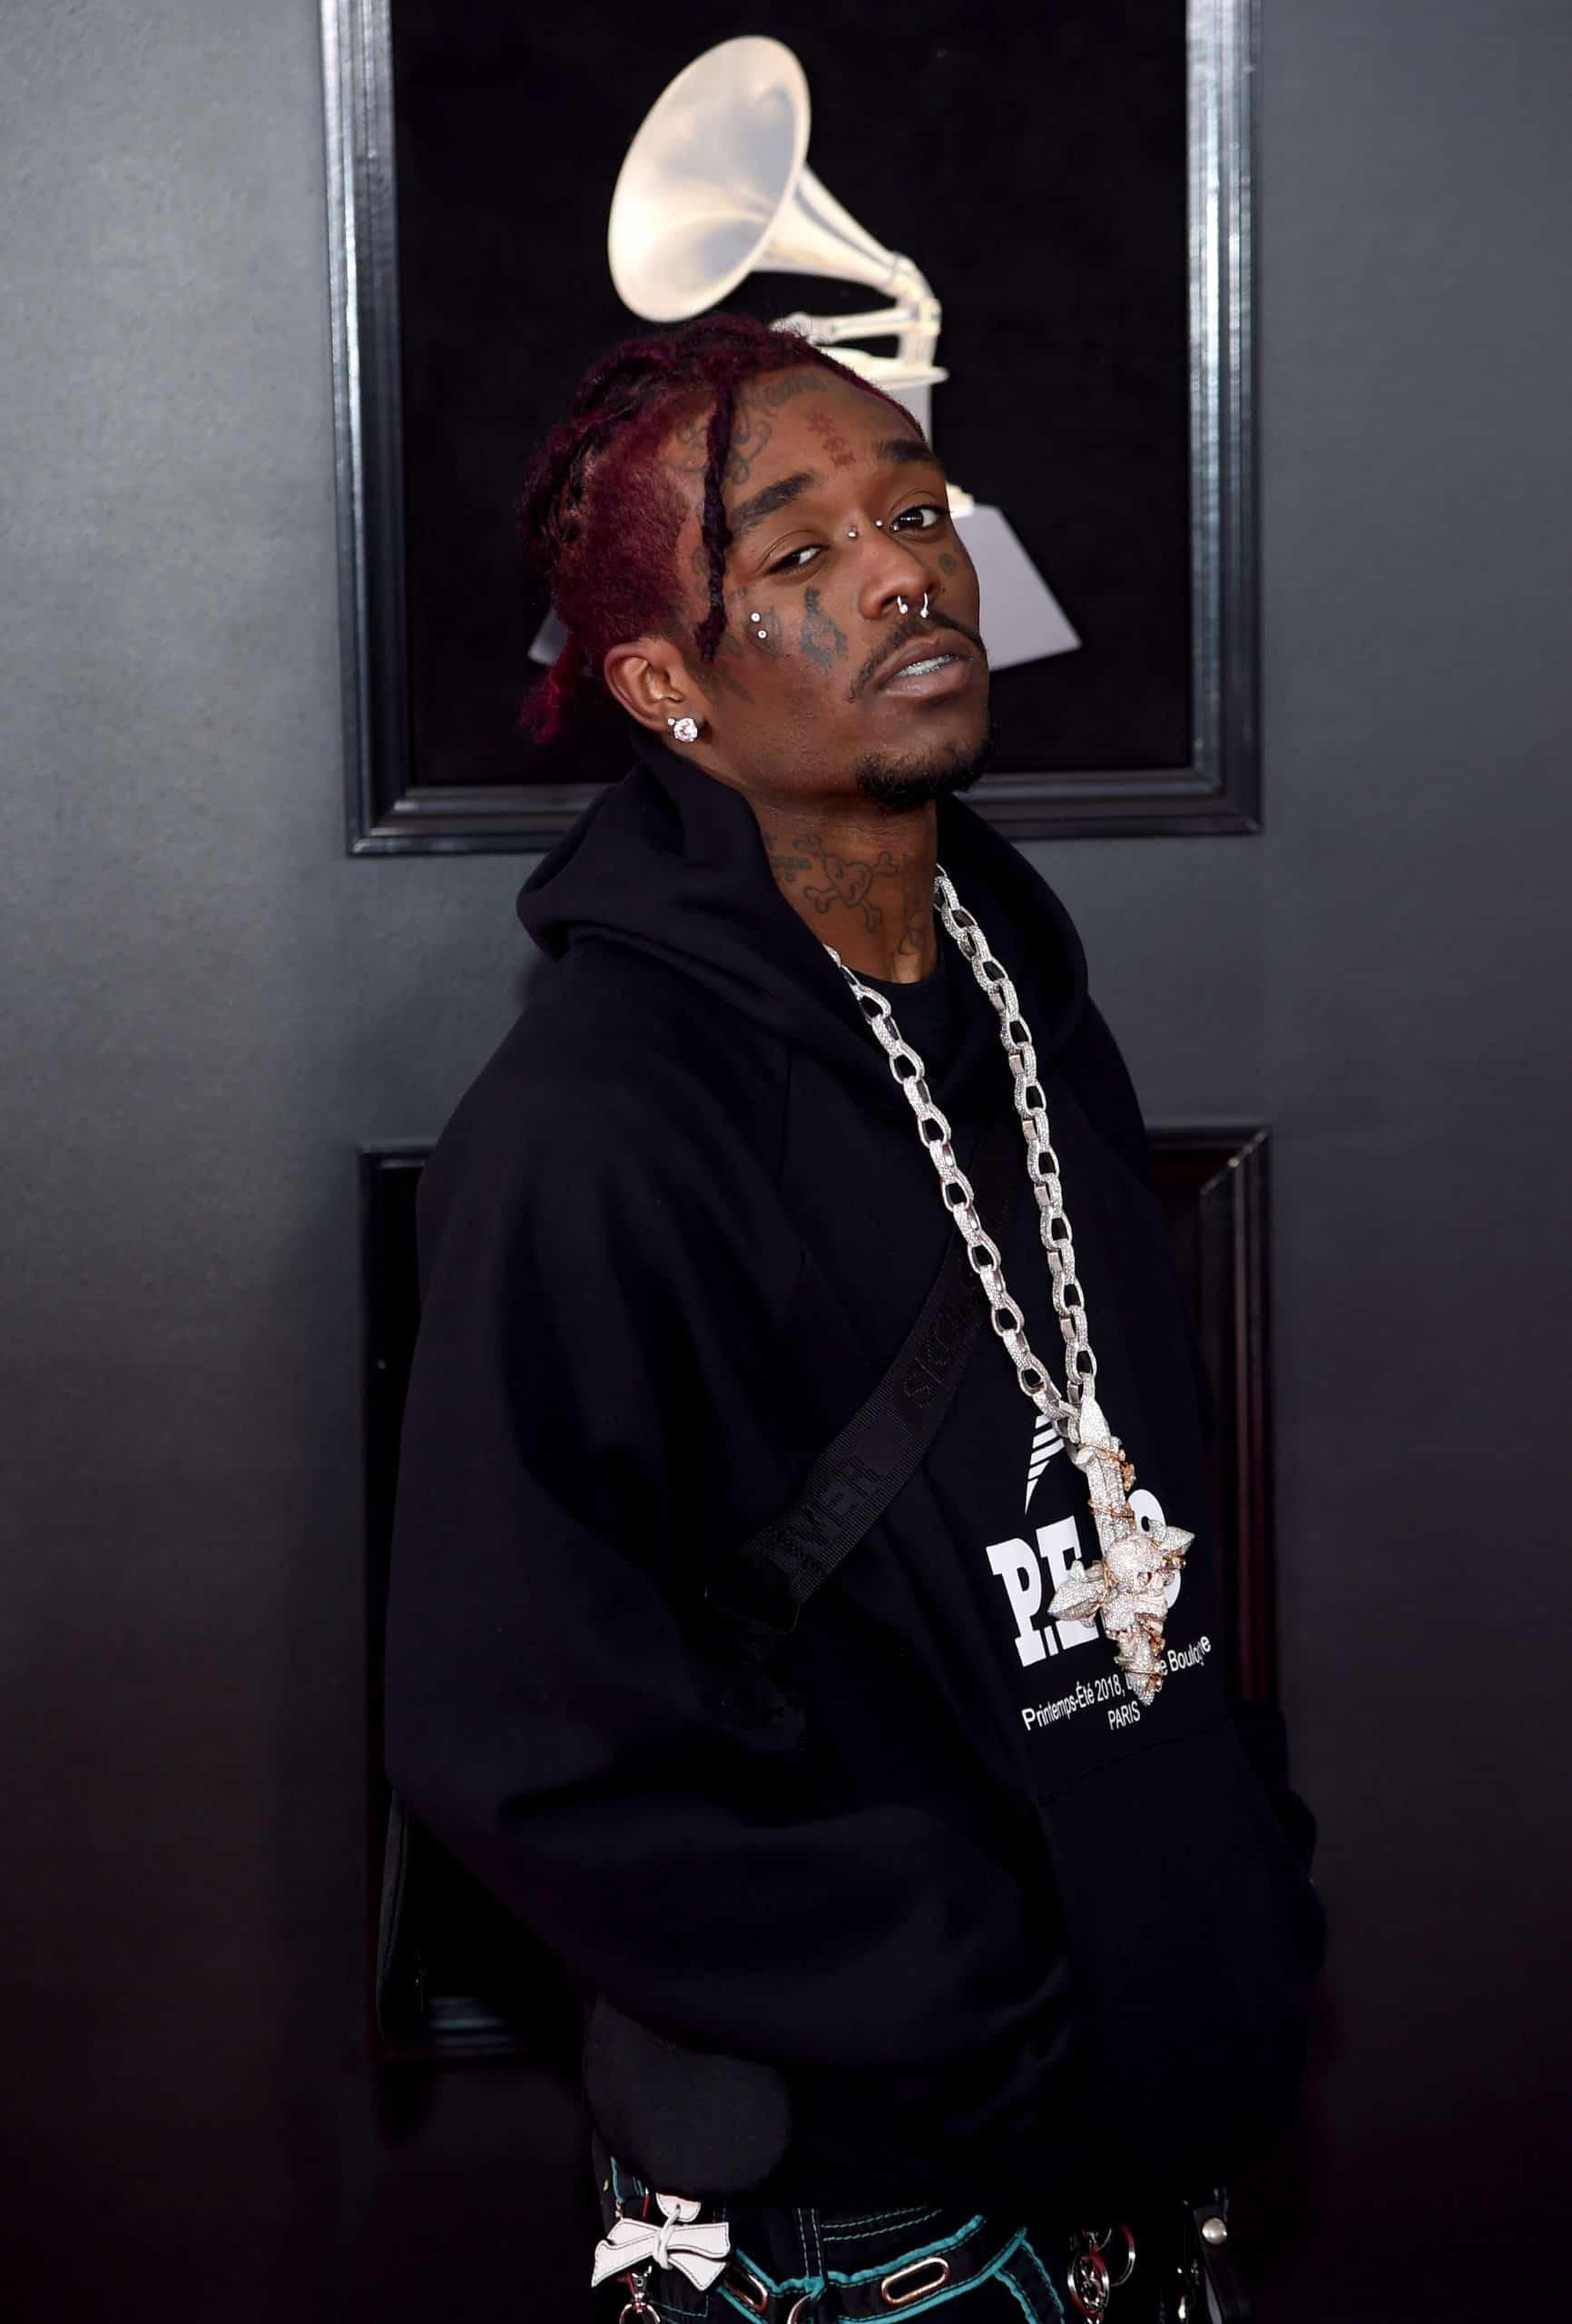 Lil Uzi Says He Paid Millions For Pink Diamond To Be Implanted In His Forehead, Sauce Walka Responds